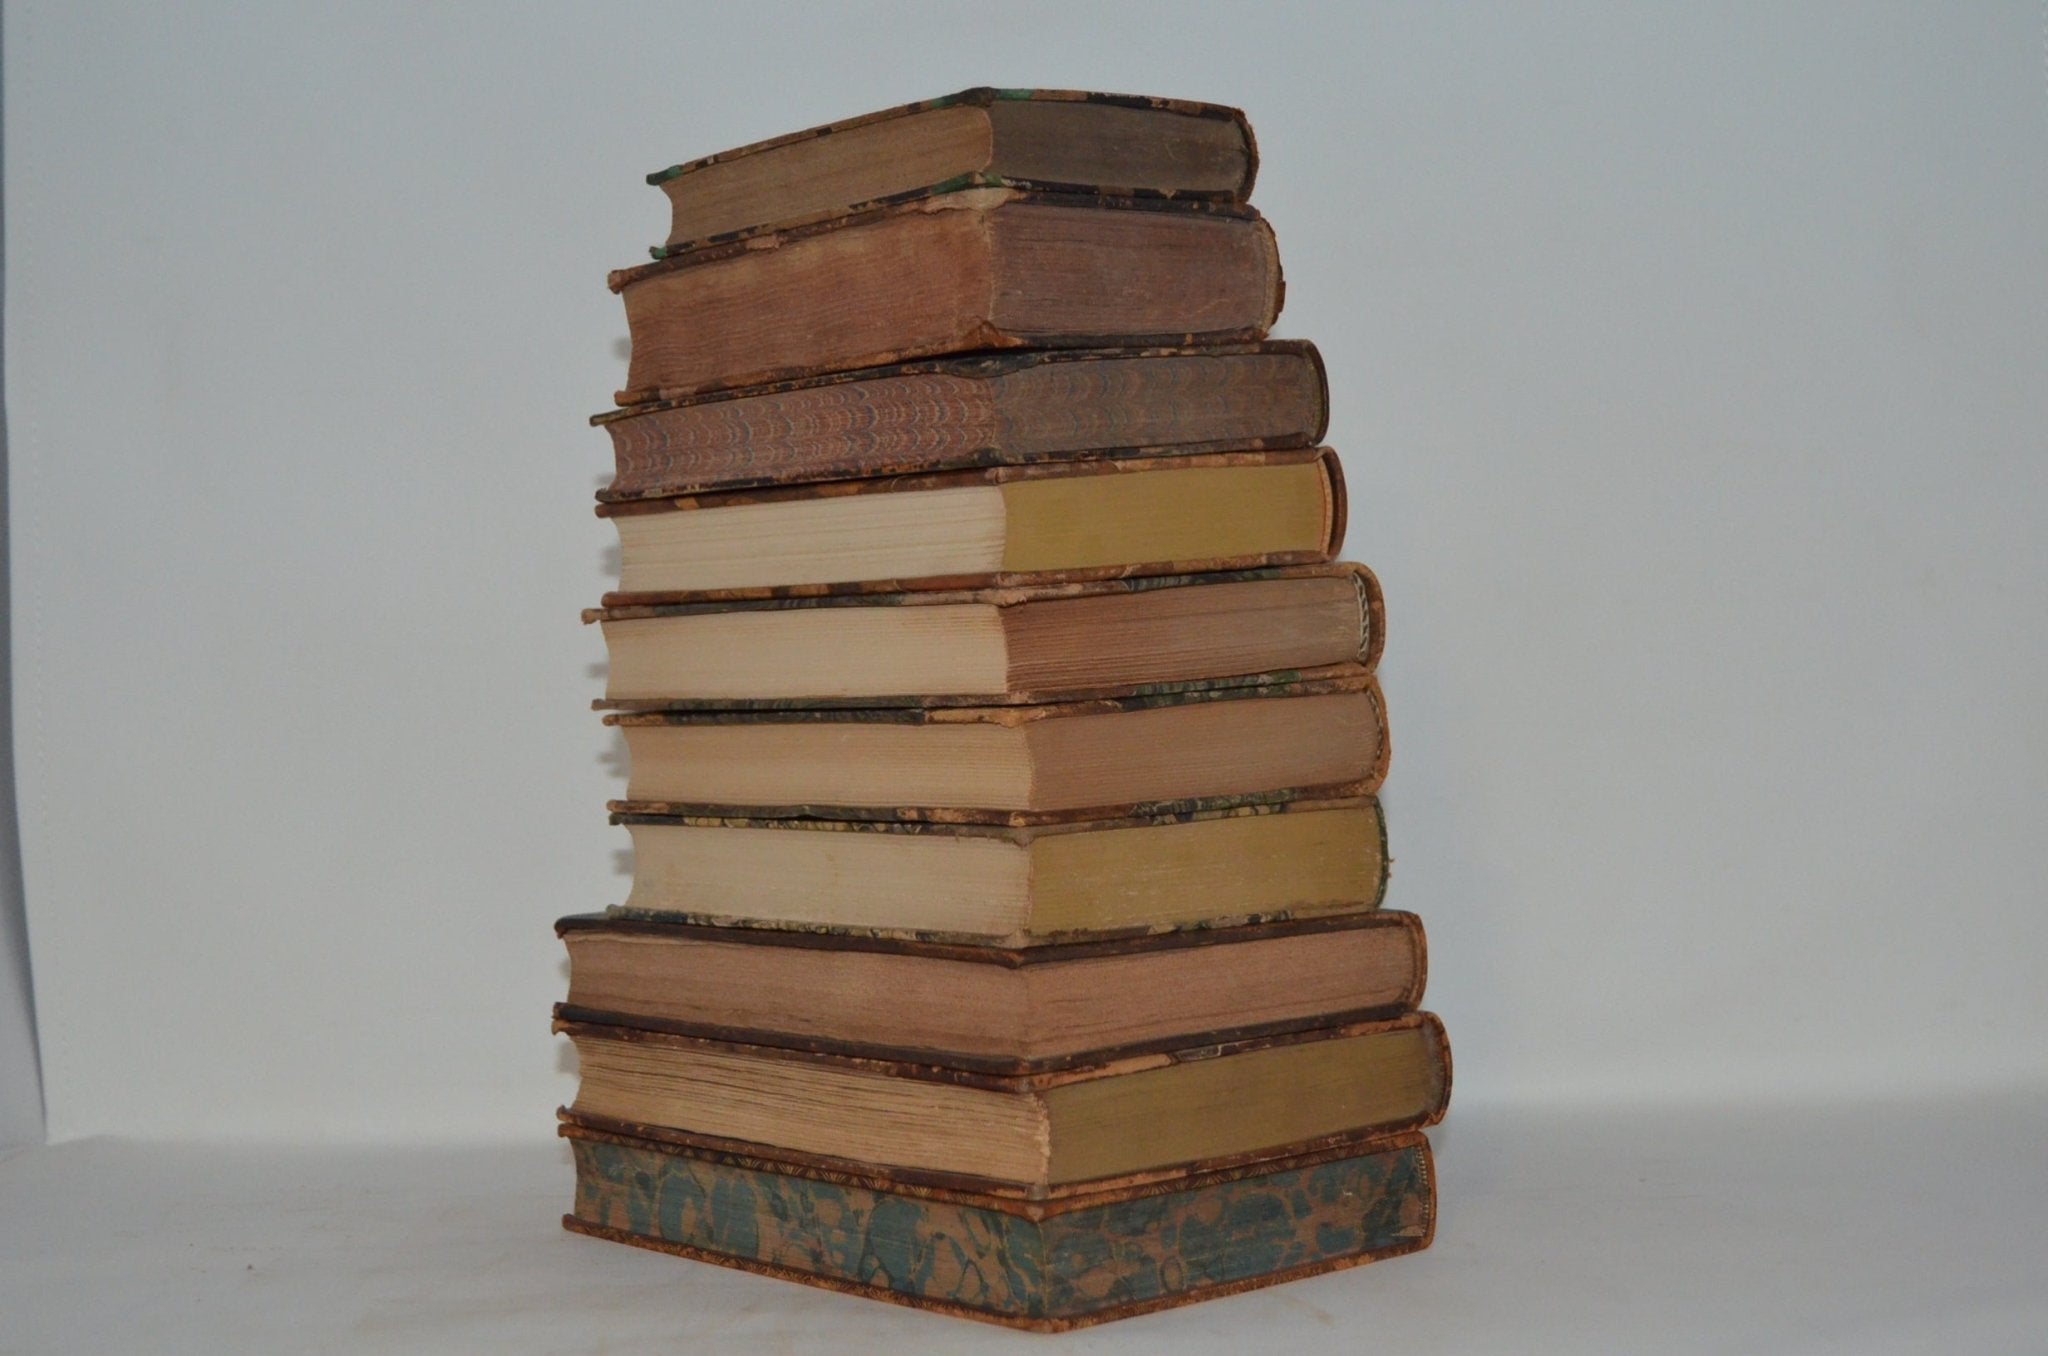 Antique Leather Bound Book Décor – 1 Foot Shades of Brown & Gold - Brookfield Books